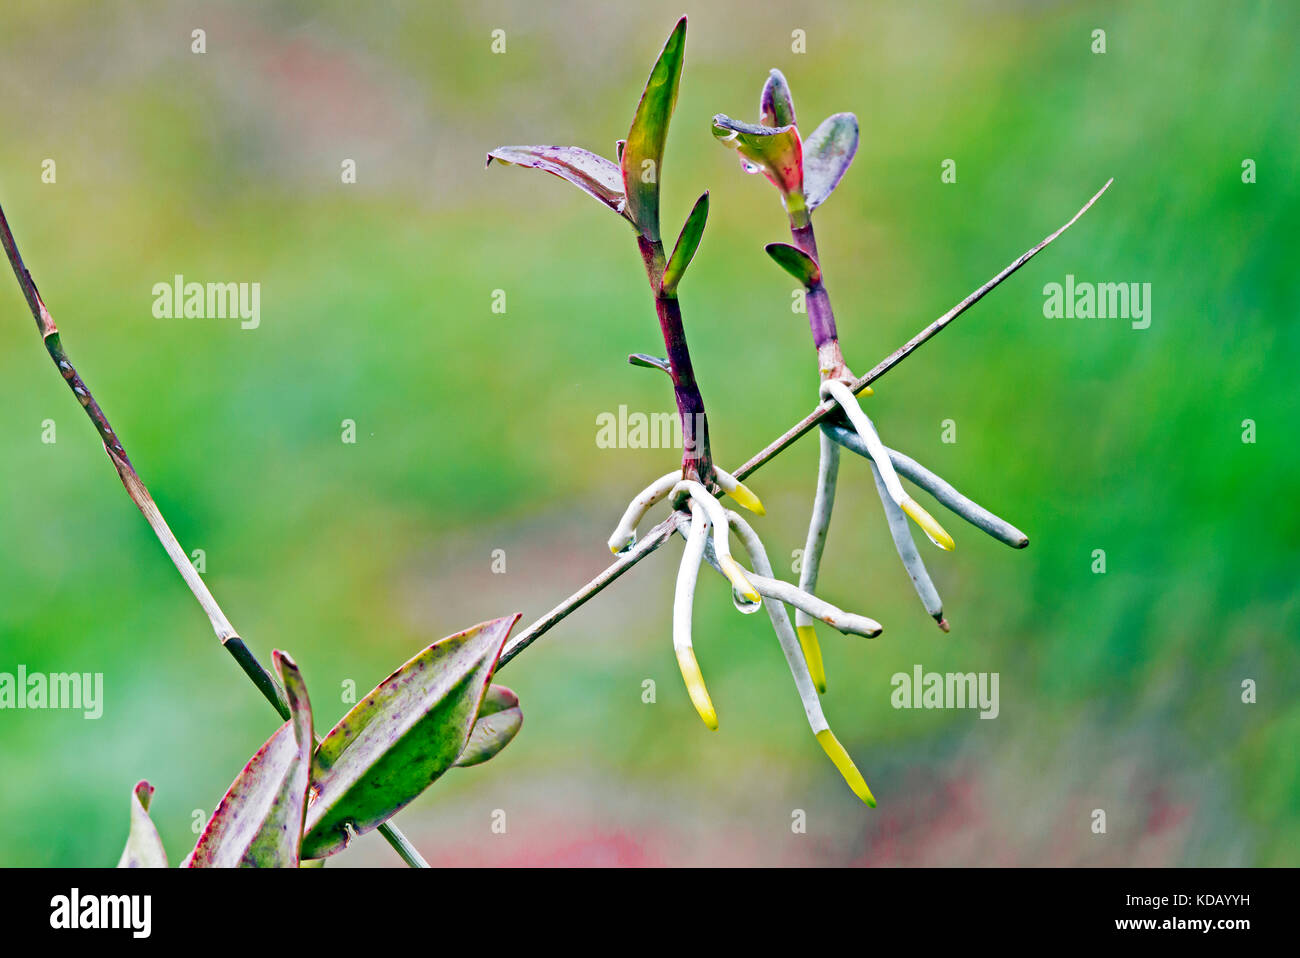 Epidendrum orchid plabt leaves and stems with new shoots on blurred garden background Stock Photo